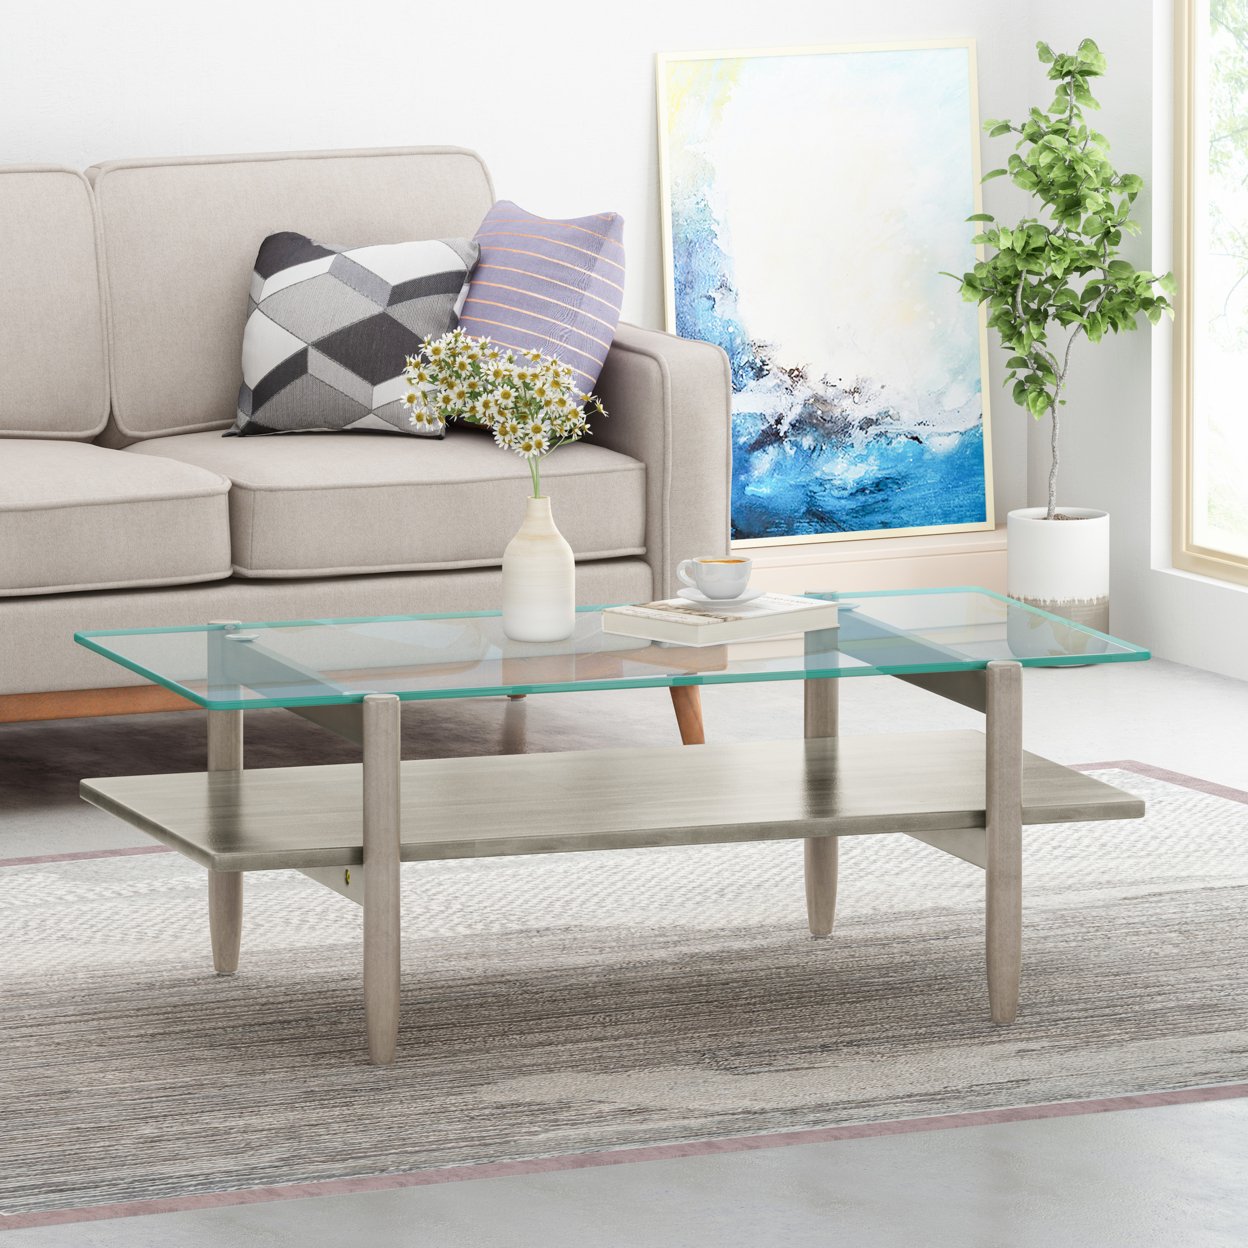 Mumford Acacia Wood Coffee Table With Tempered Glass Top - Gray Finish